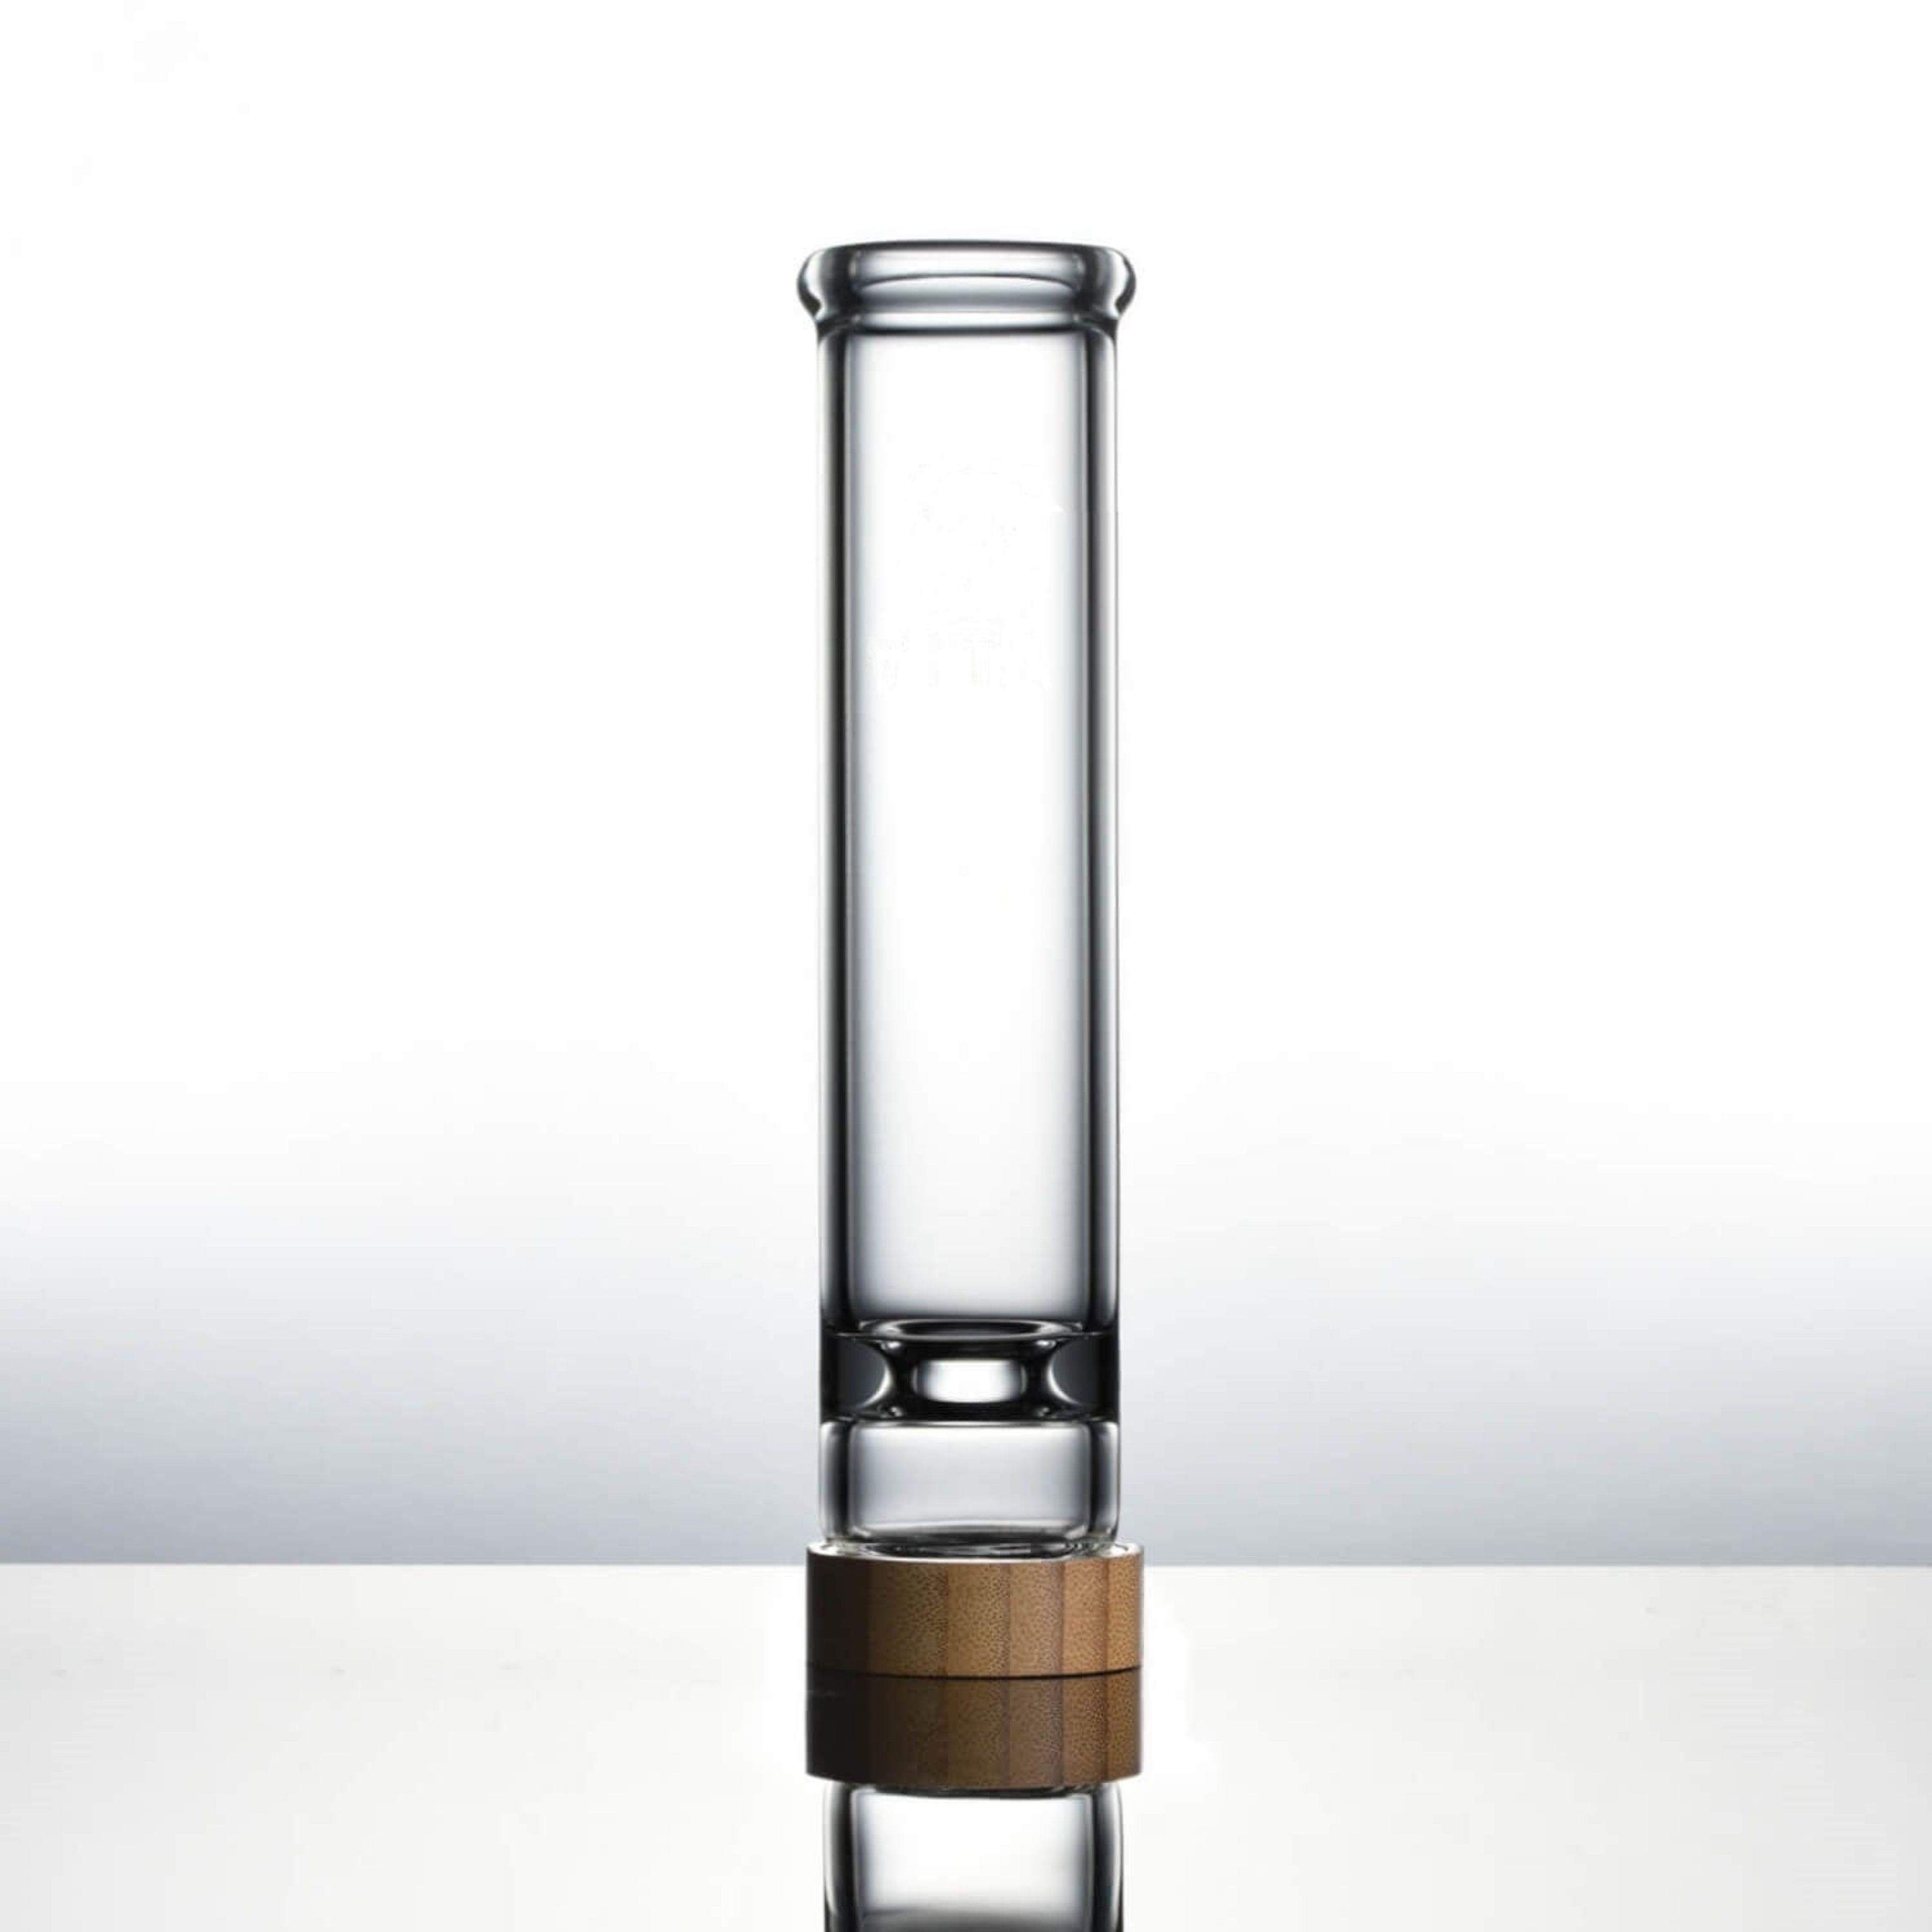 The Hourglass Mouthpiece